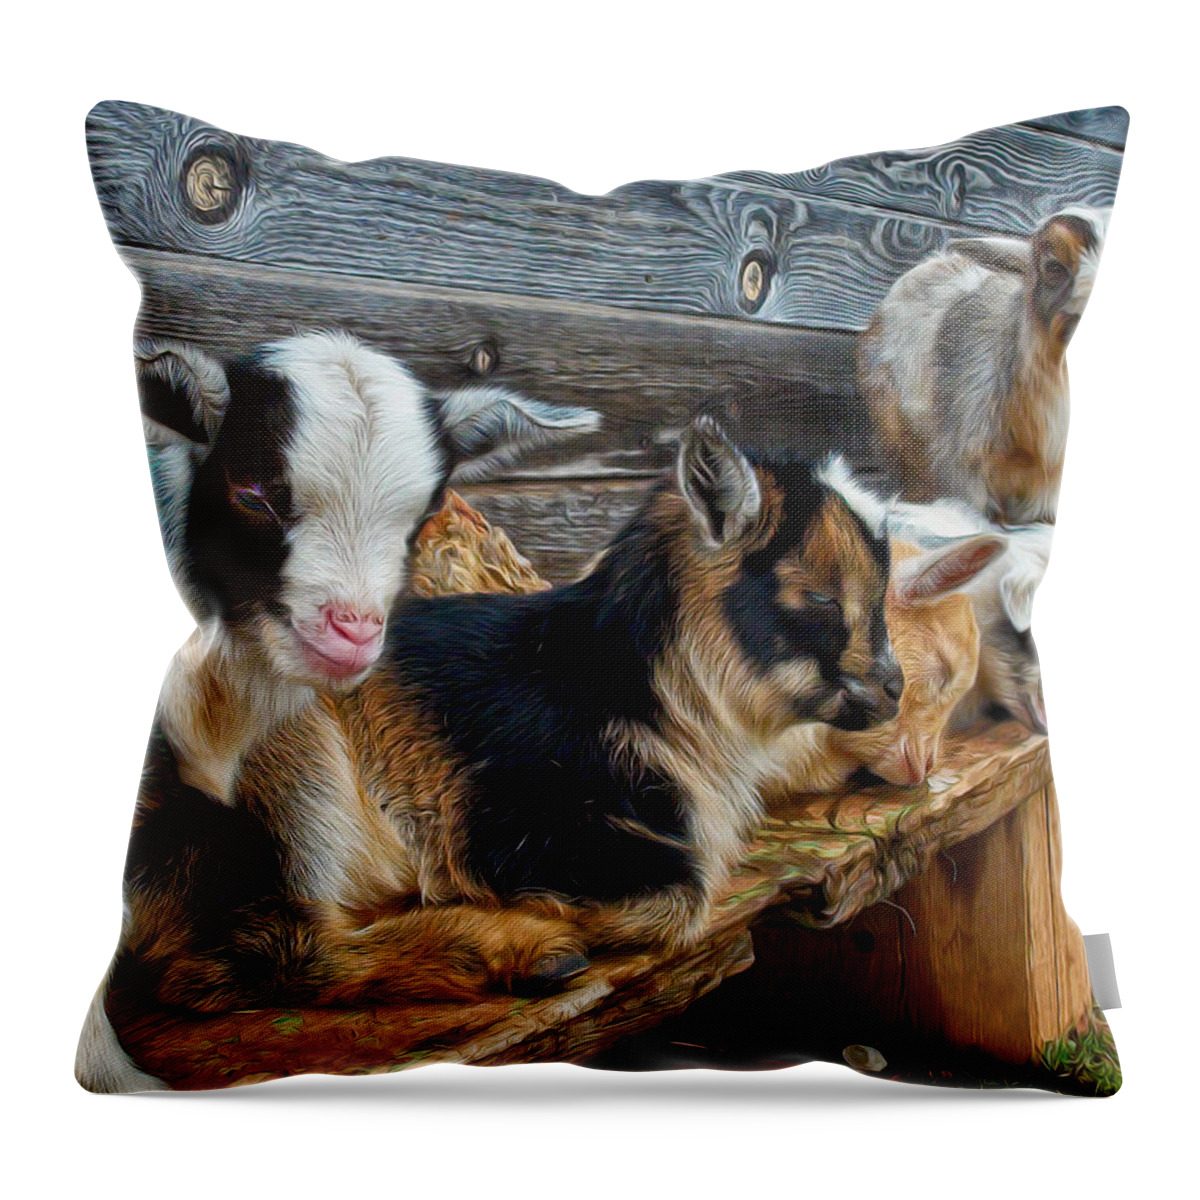 Baby Goats Throw Pillow featuring the digital art Sleepy Afternoon by Kathleen Bishop